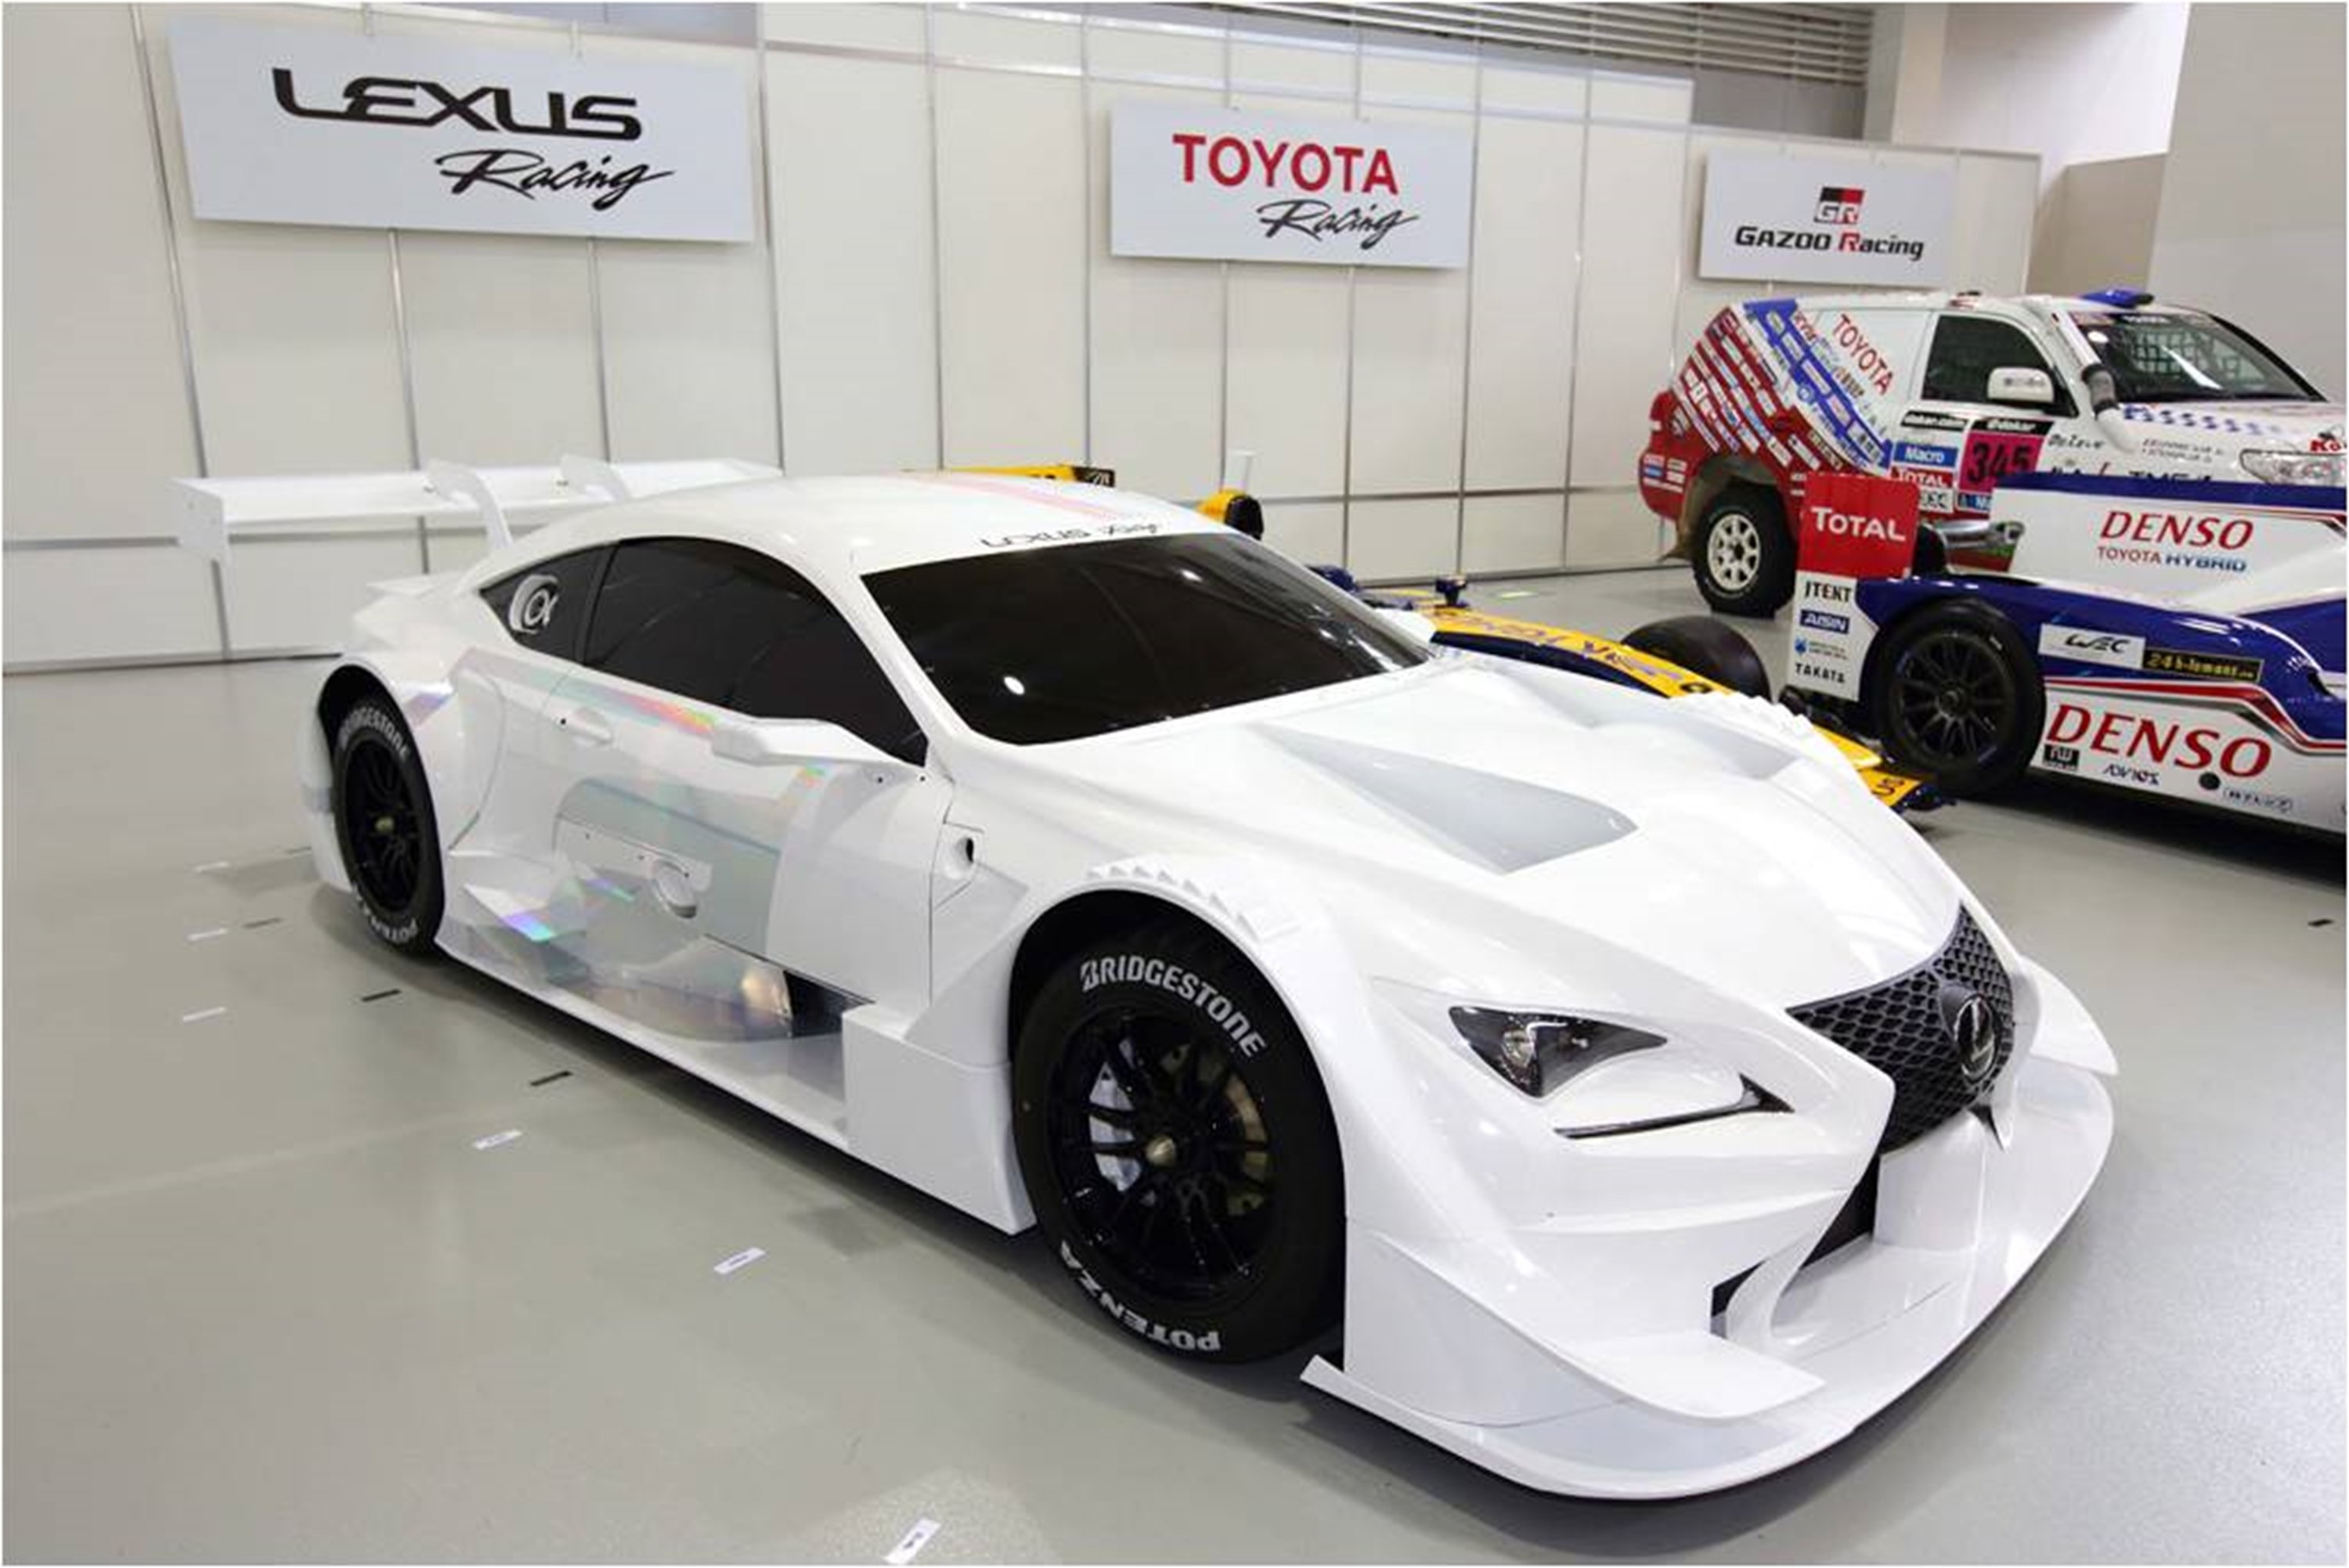 here, Is, The, 2014, Lexus, Rc, F, Gt500, Produced, For, The, Supergt, Series, In, Japan, , 3000x2003 Wallpaper